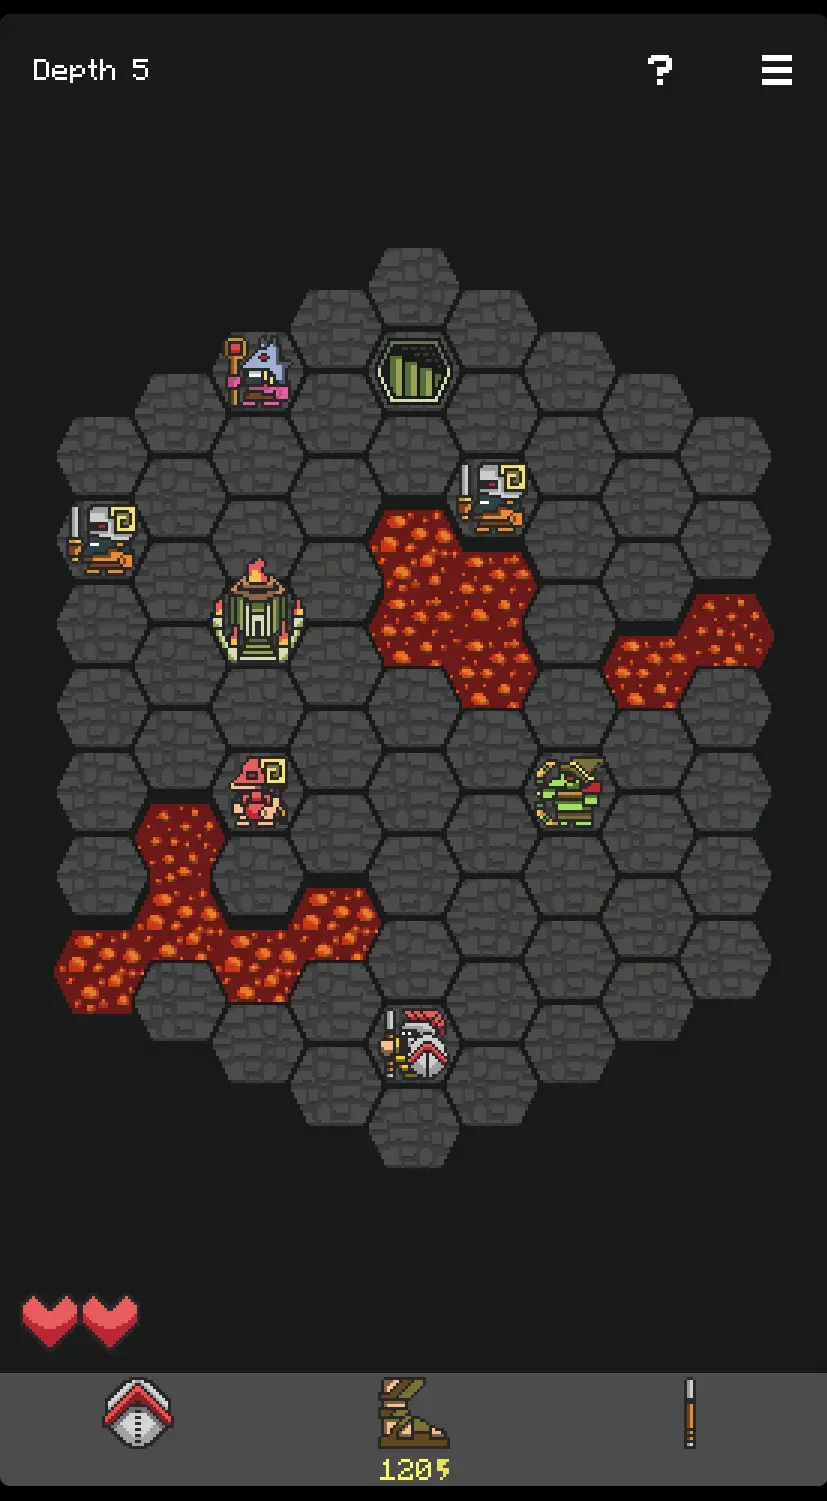 Image of a game level. The hoplite soldier is at the bottom, and the level is filled with enemies and lava. There is one upgrade shrine and one staircase leading to the next level. 